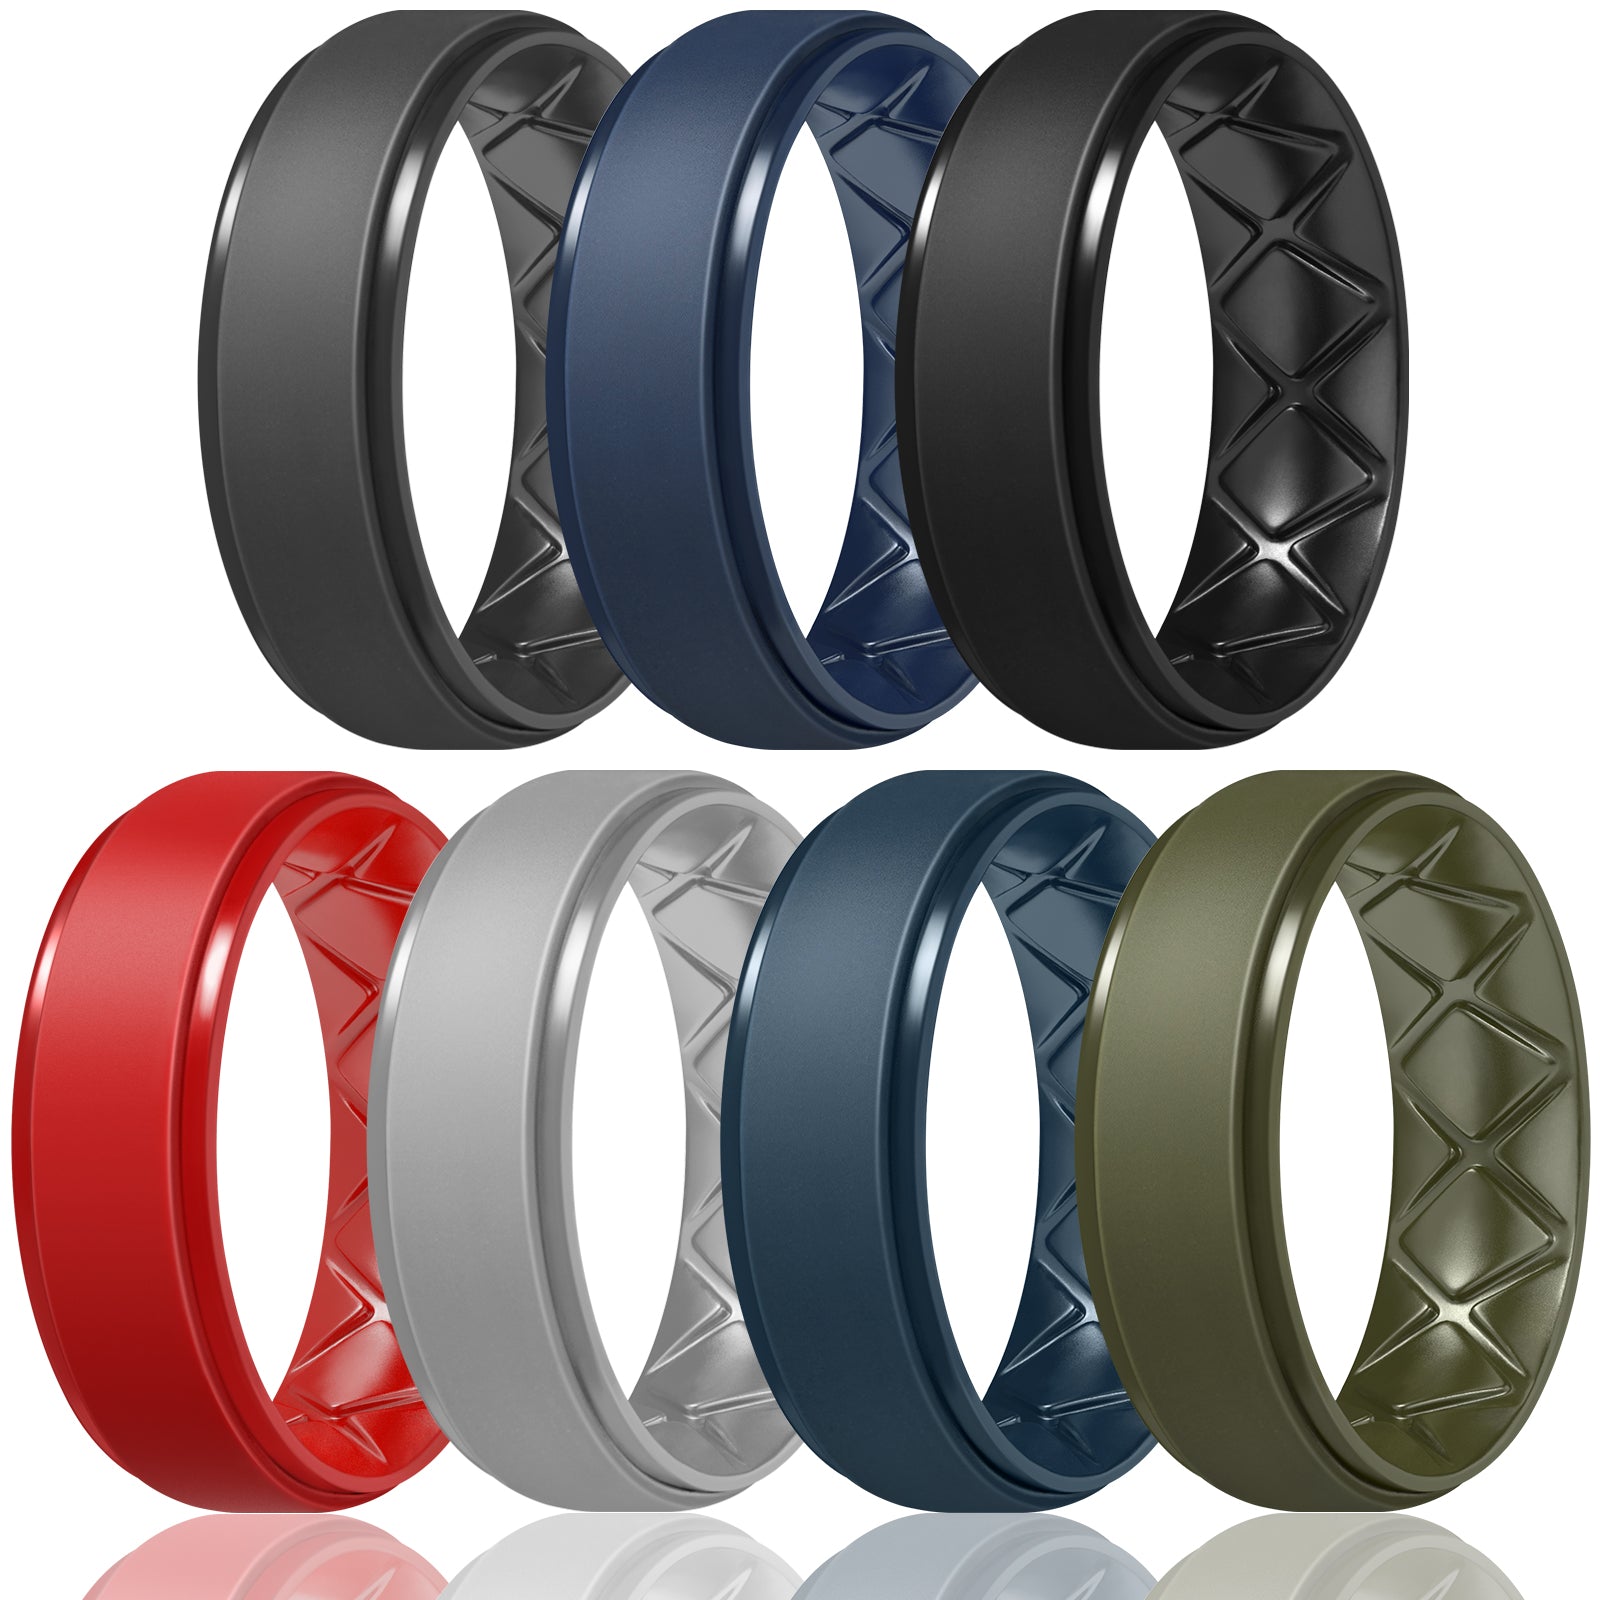 8mm His & 6mm Her's Wedding Band Rubber Silicone Ring Set | eBay